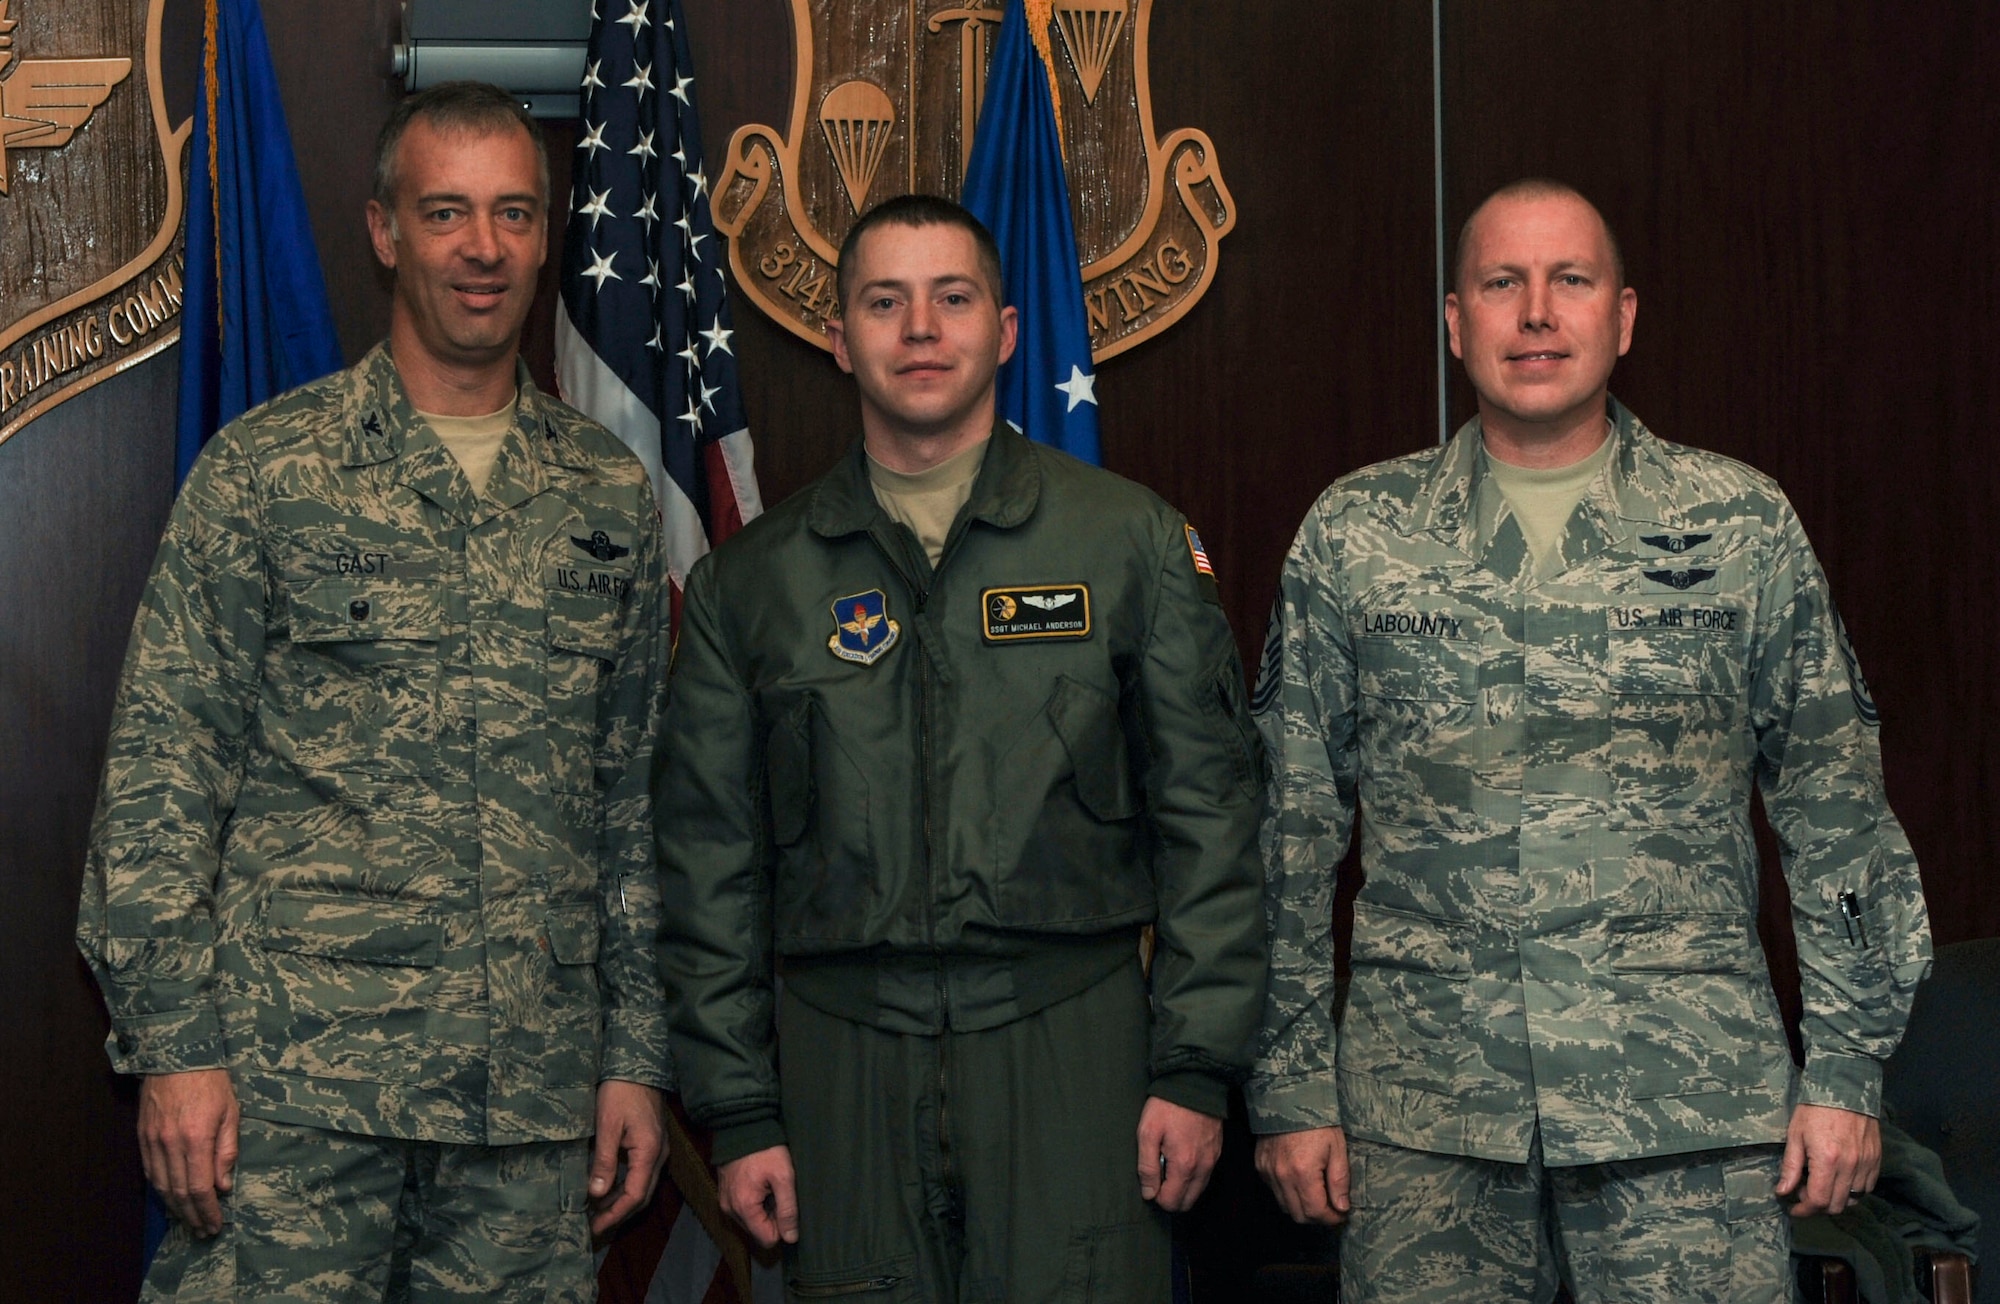 U.S. Air Force Col. Jeffrey Gast, 314th Airlift Wing vice commander, along with U.S. Air Force  Chief Master Sgt. Brian Labounty, 314th Airlift Wing command chief, congratulate U.S. Air Force Staff Sgt. Michael Anderson, 48th Airlift Squadron information operations noncommissioned officer C-130 formal training unit instructor loadmaster, on his selection as Combat Airlifter of the Week Jan. 27, 2016, at Little Rock Air Force Base, Ark. (U.S. Air Force photo by Airman 1st Class Mercedes Taylor)